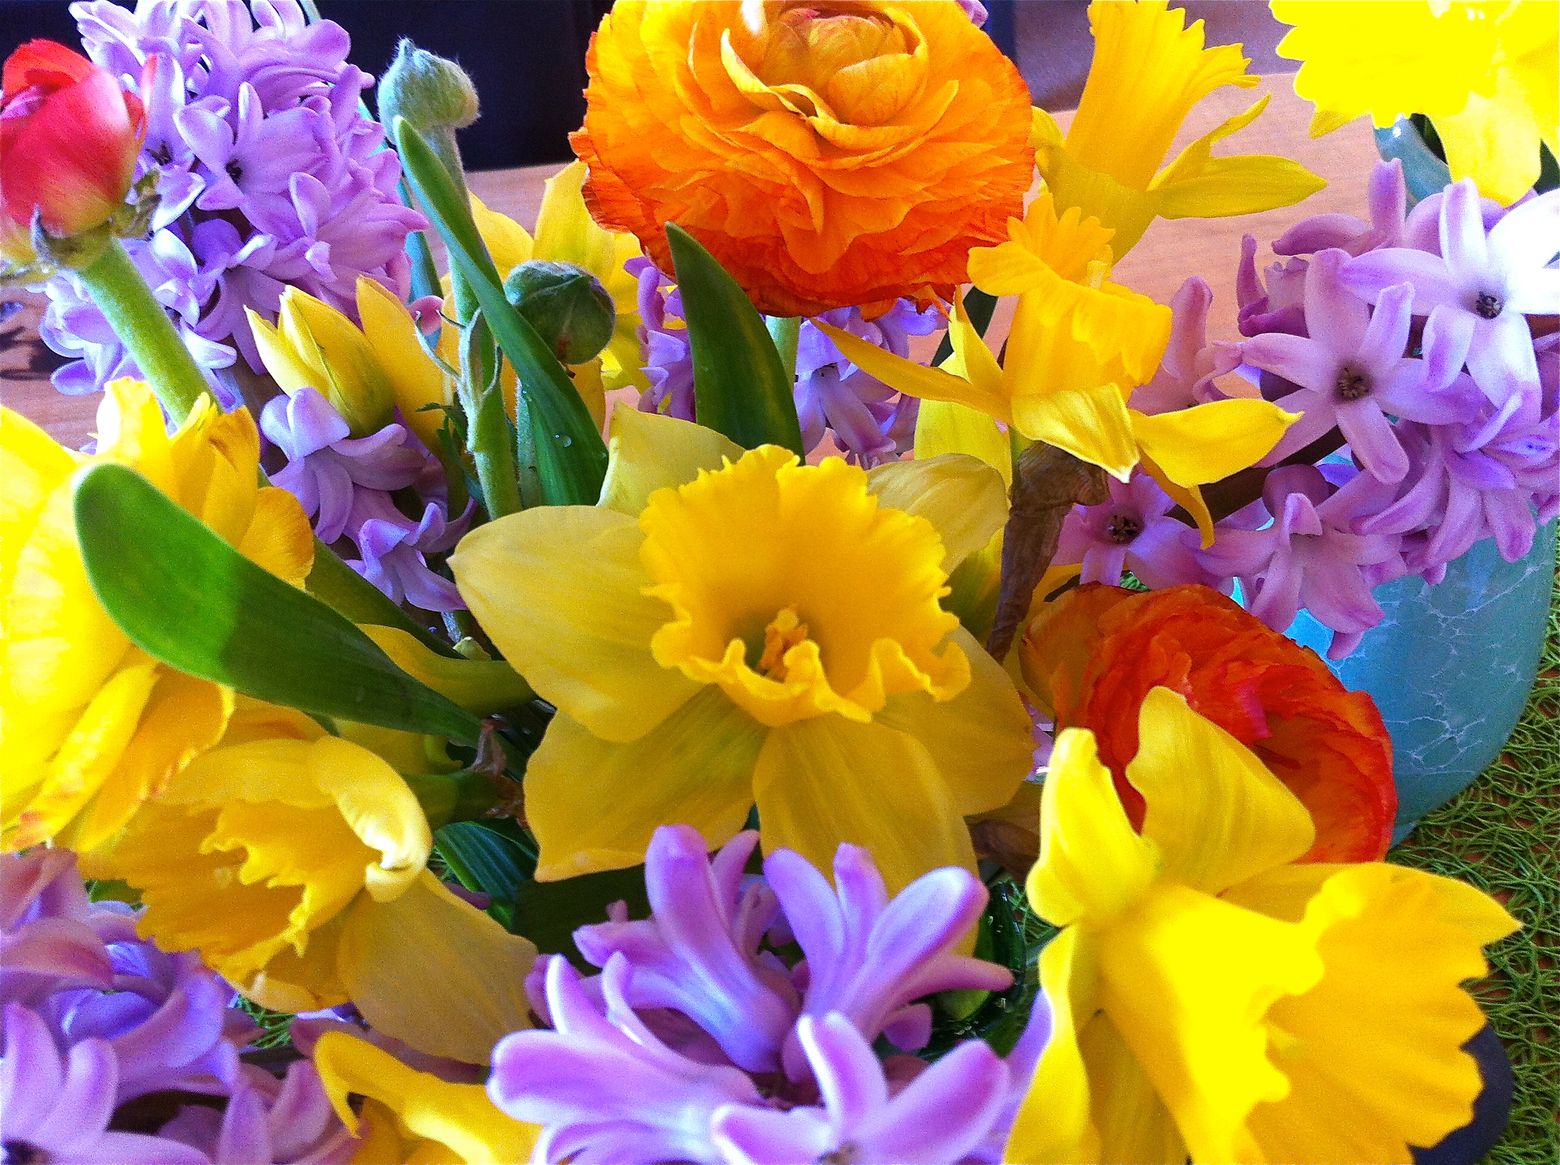 Spring flowers: Get a blast of color with no fussy arranging | The